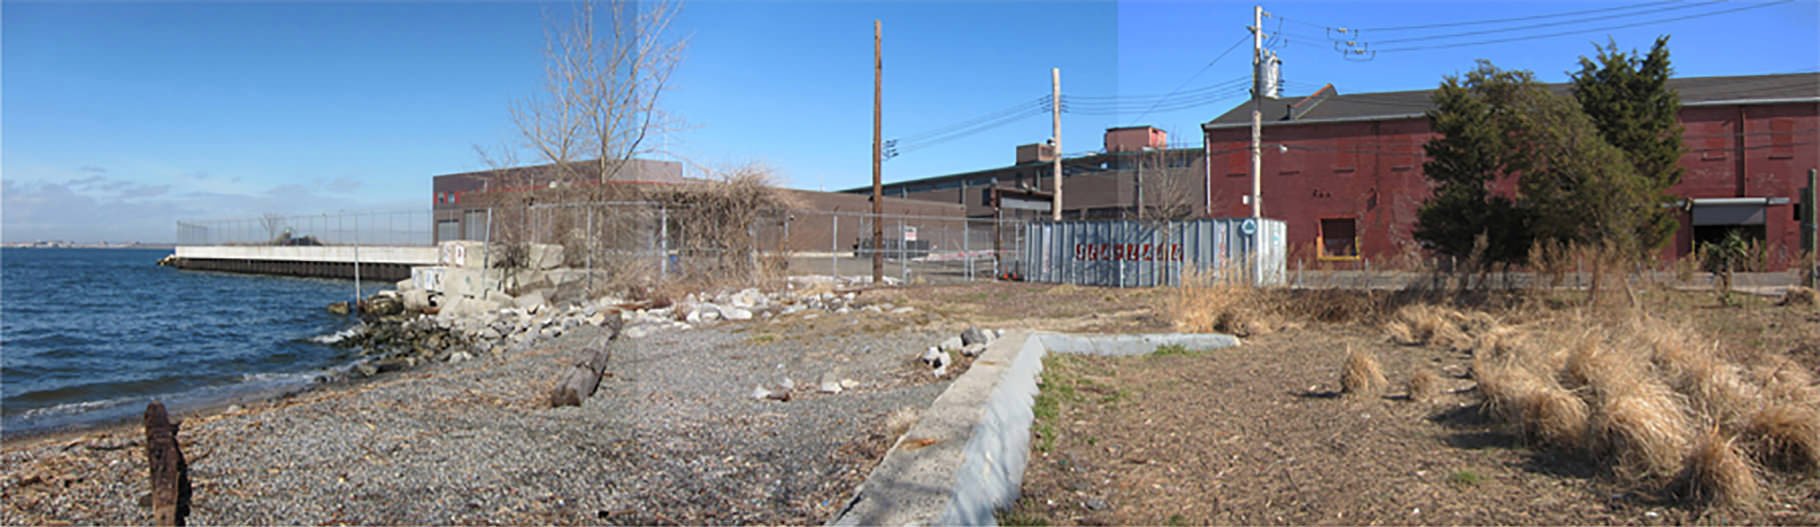 NYC Brooklyn Red Hook Park Boat Storage Architect Architecture Public Design Shipping Containers